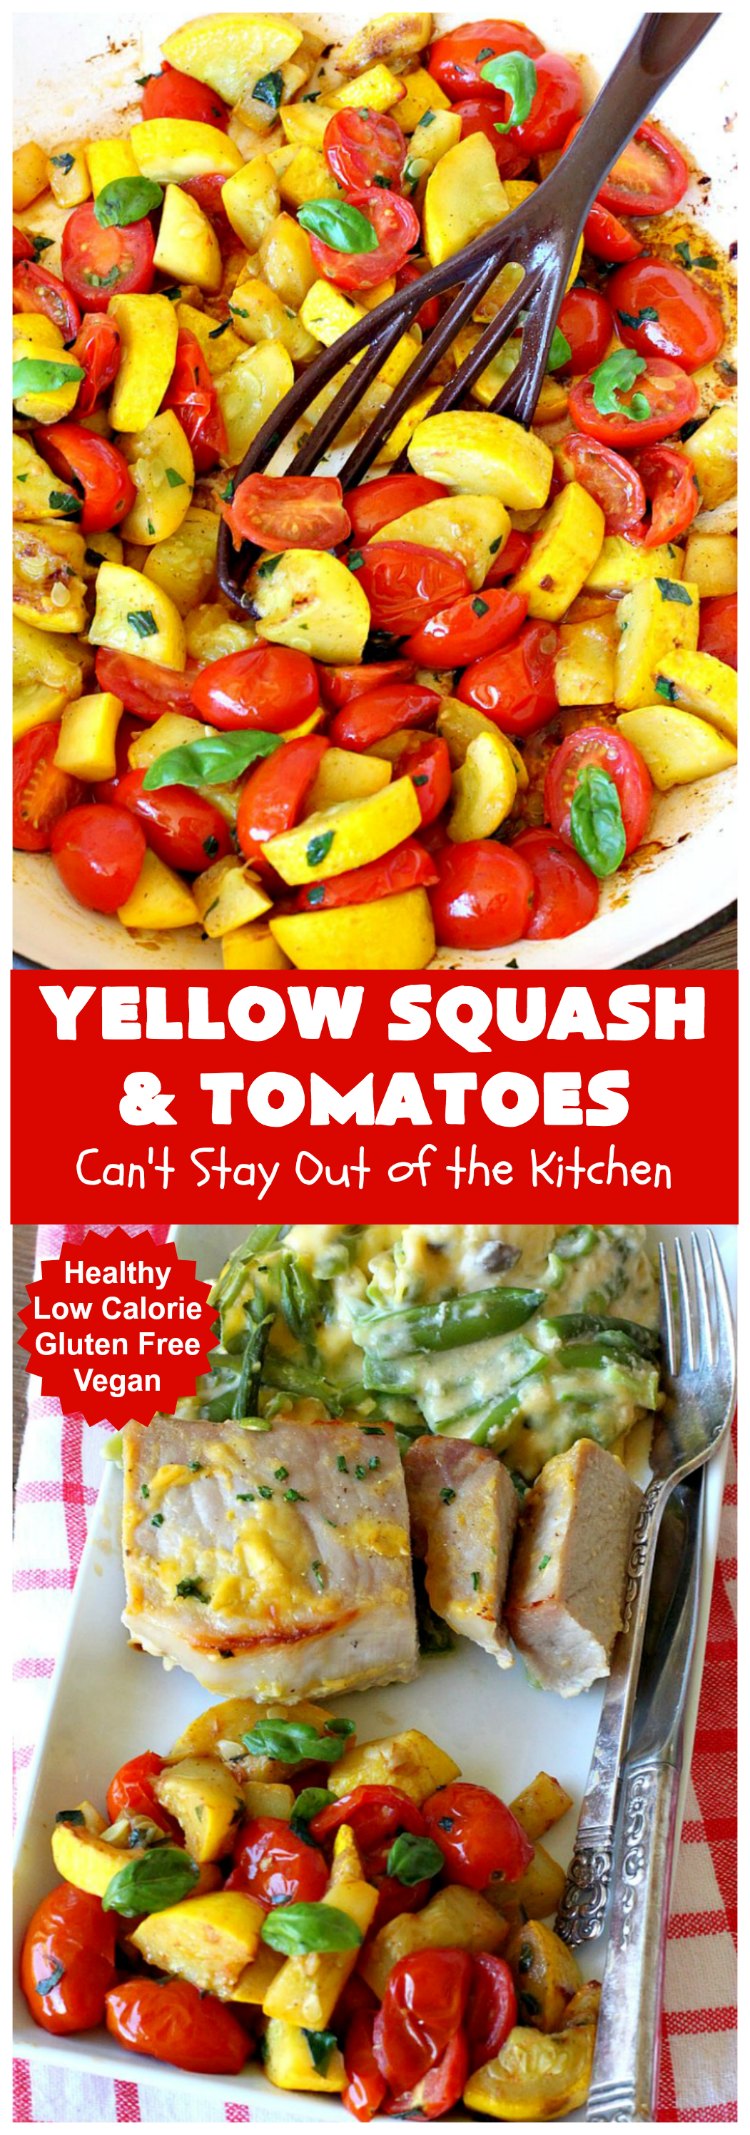 Yellow Squash and Tomatoes | Can't Stay Out of the Kitchen